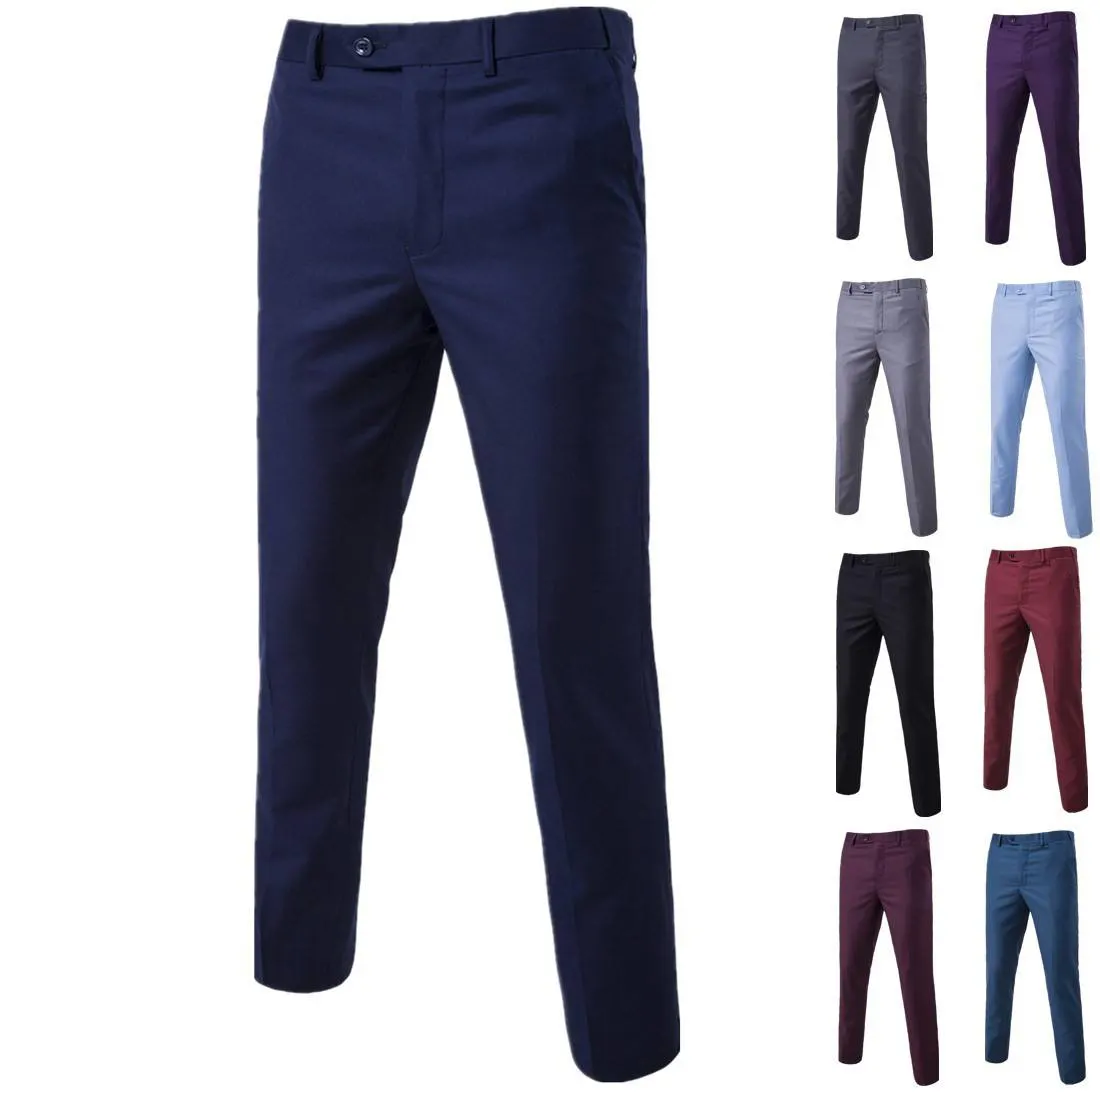 High Quality Men Pants Slim Fit Comfortable Breathable Cotton Casual Thin Business Wedding Suit Trousers